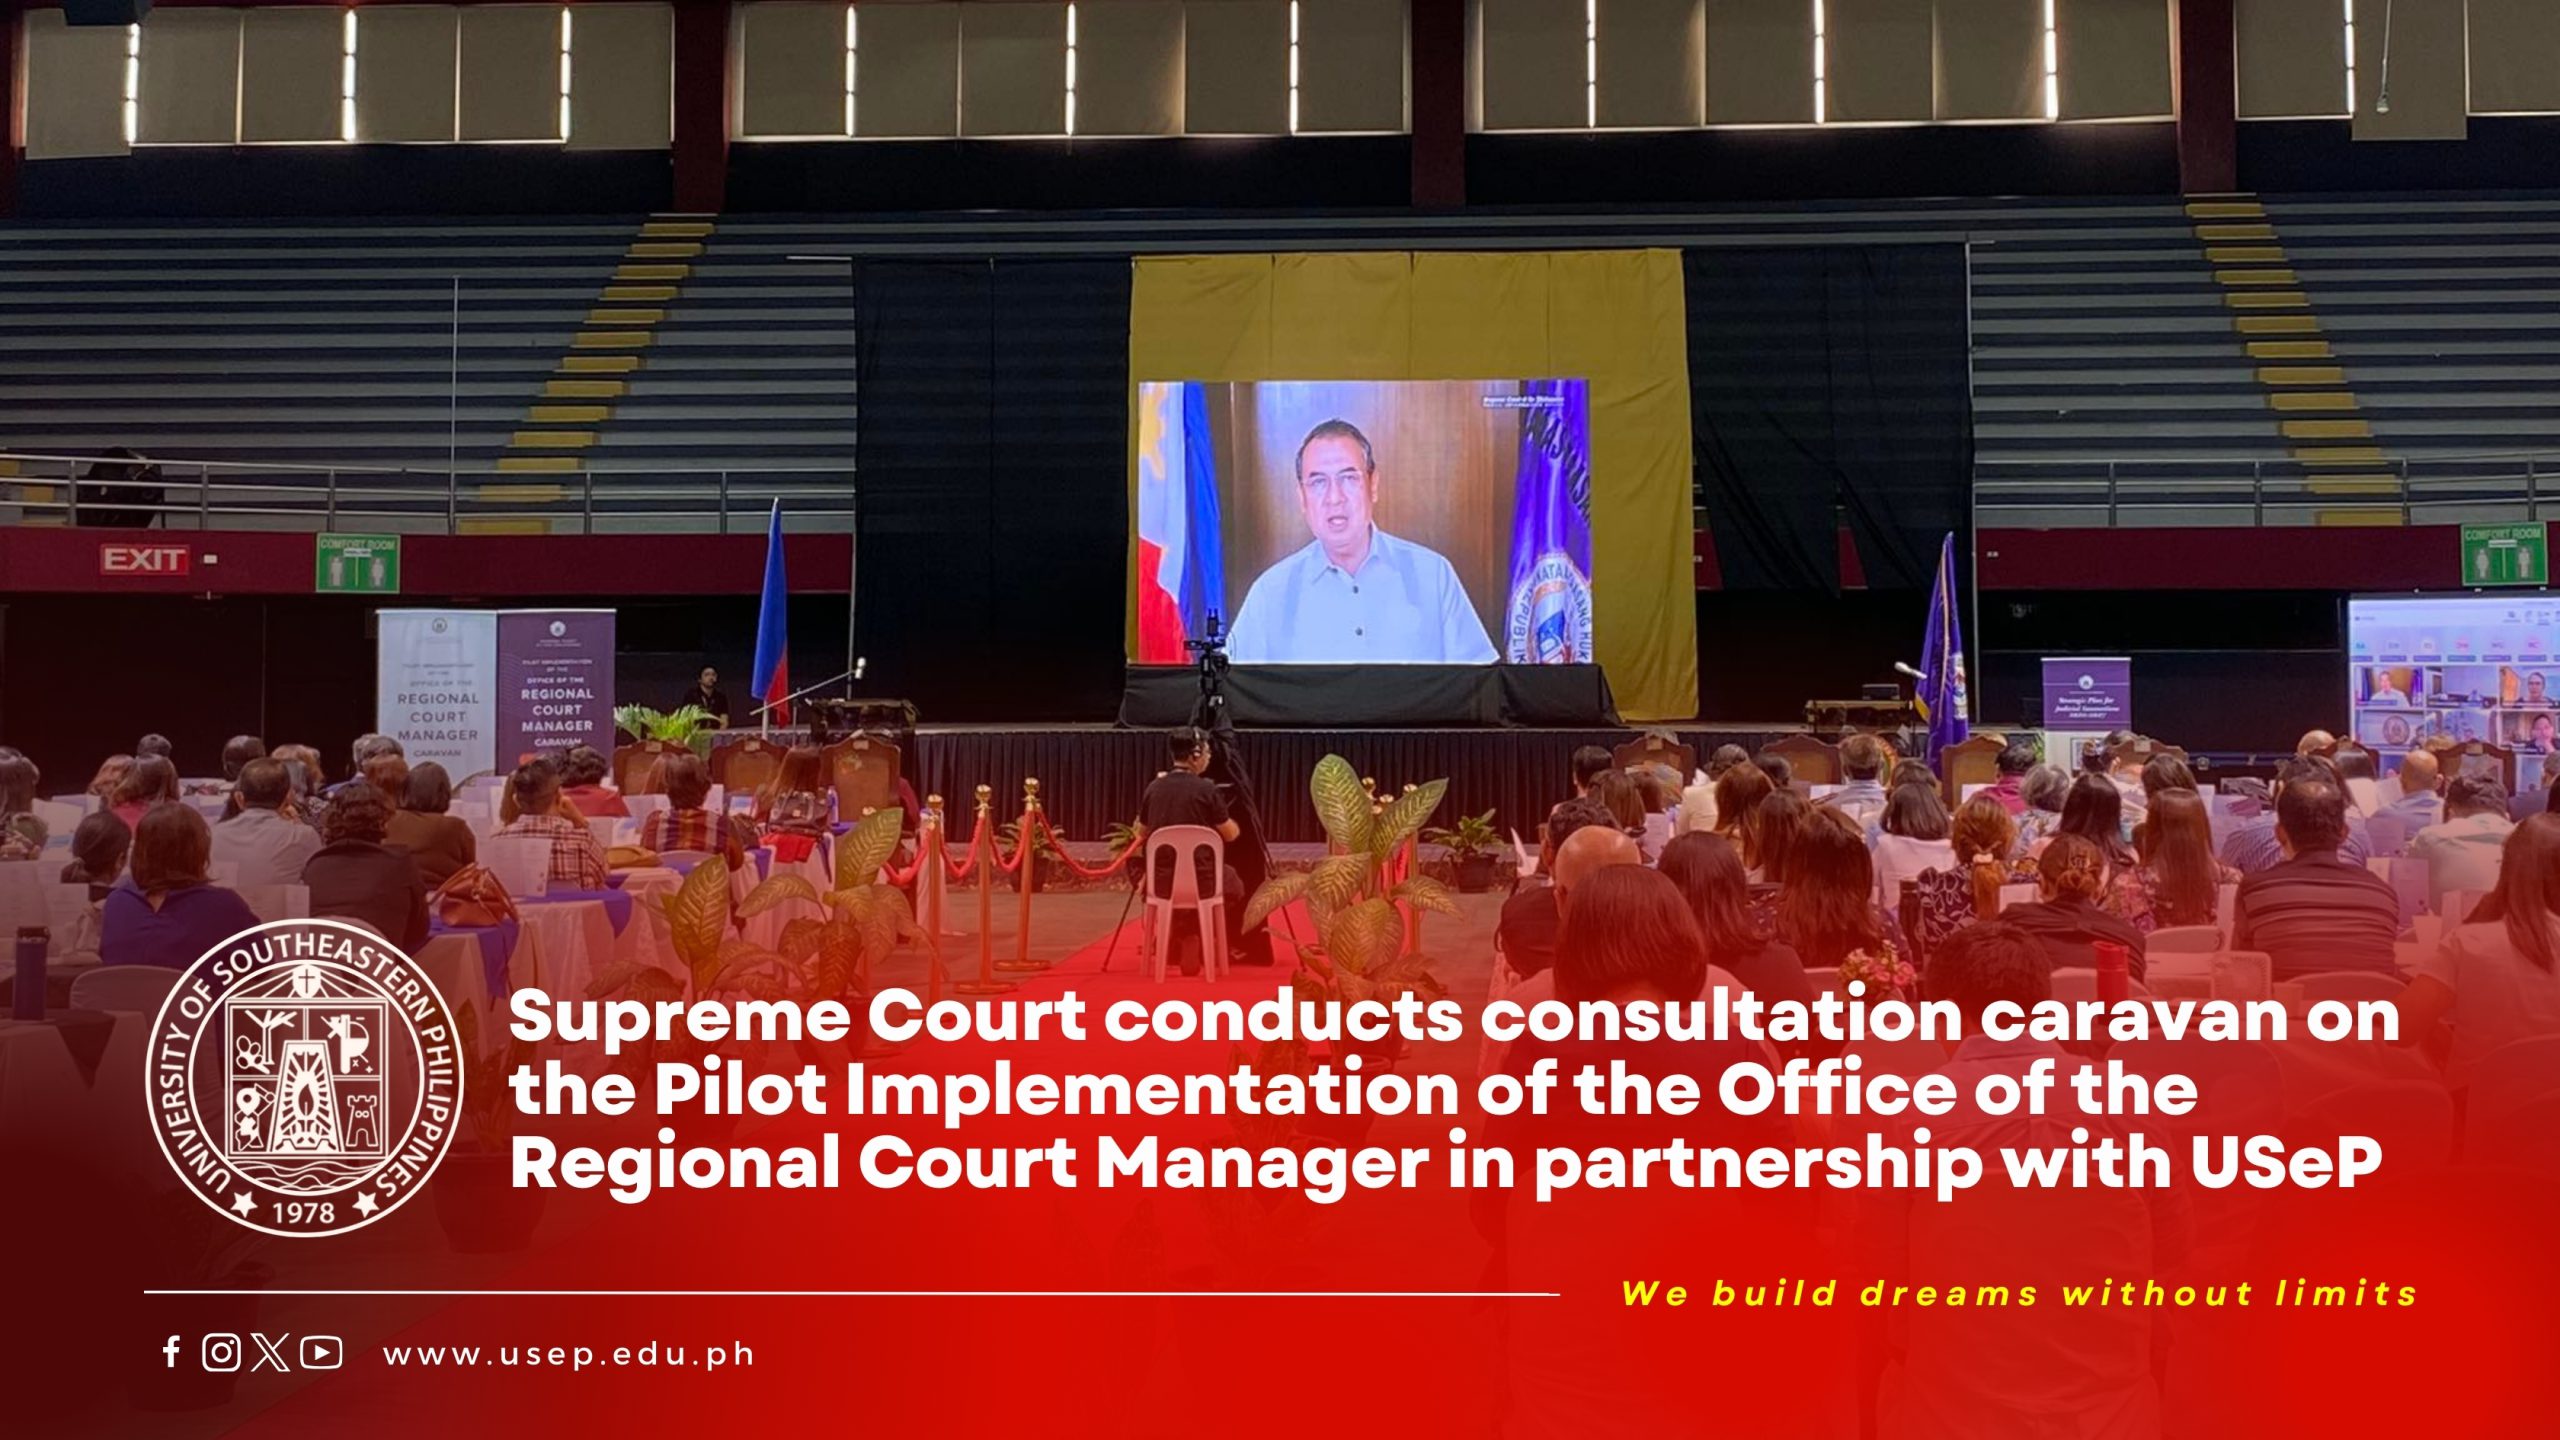 Supreme Court conducts consultation caravan on the Pilot Implementation of the Office of the Regional Court Manager in partnership with USeP